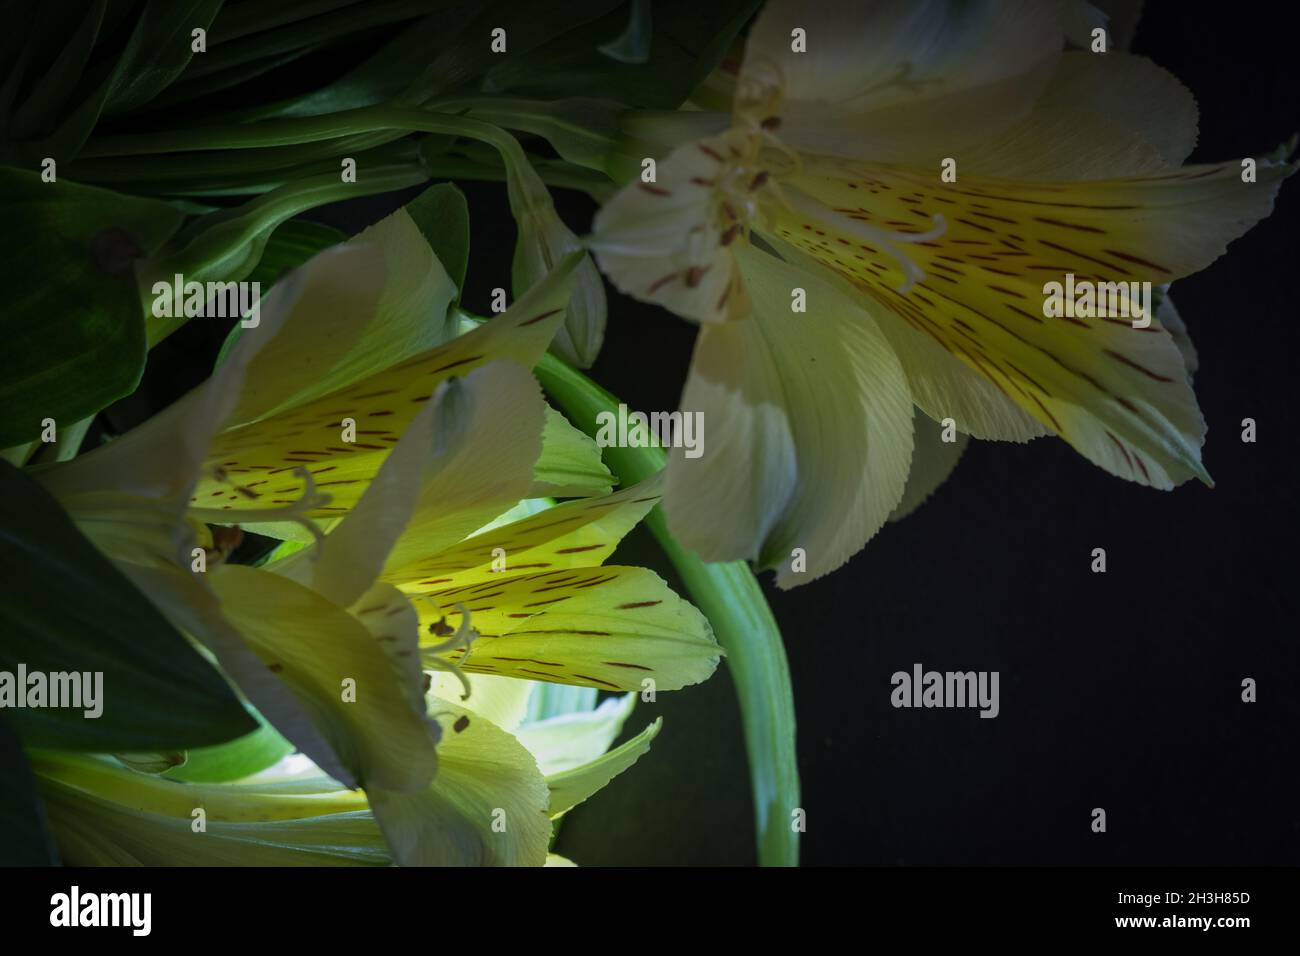 Yellow and white petals of alstroemeria flowers together with green stems and dark background.  Flat lay with flowers on left; space for text on right Stock Photo